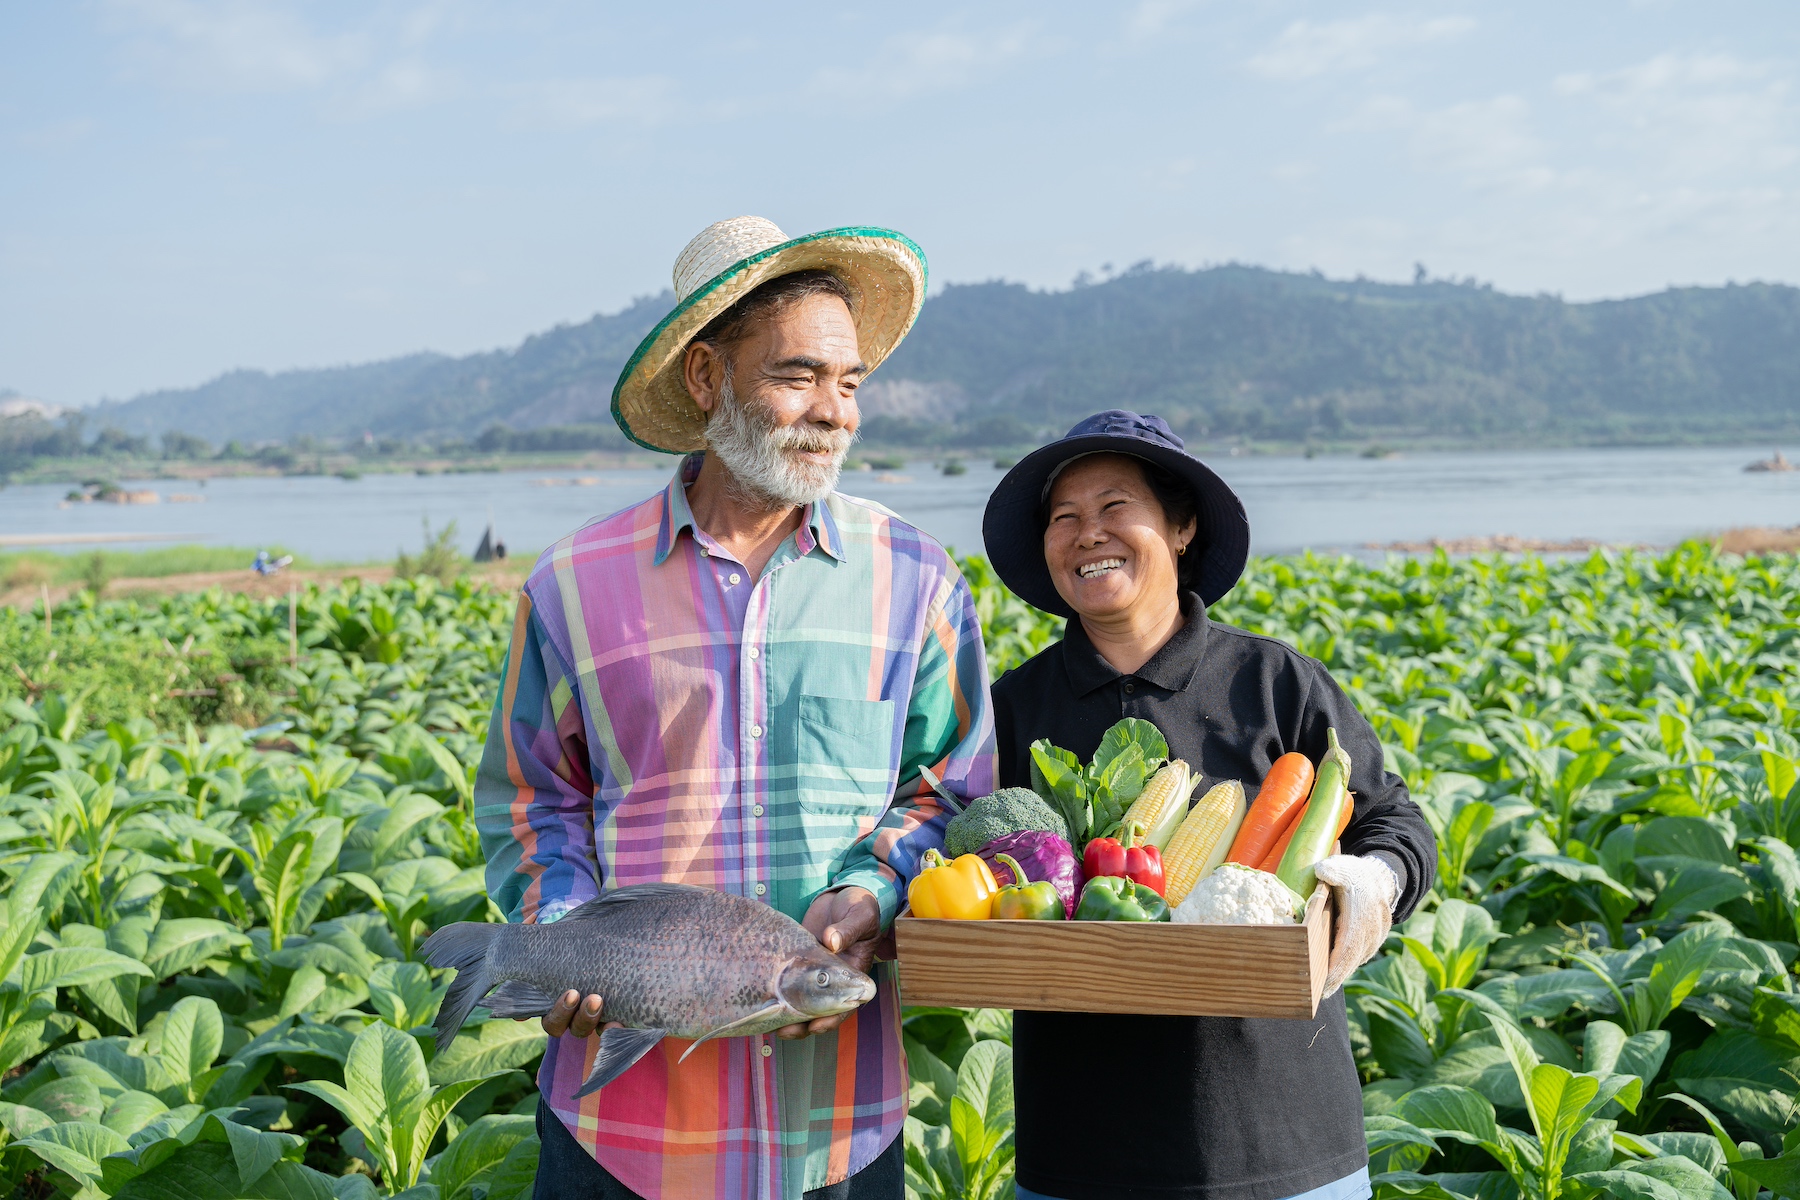 A fisherman and a farmer stand together in a field smiling and holding up their produce